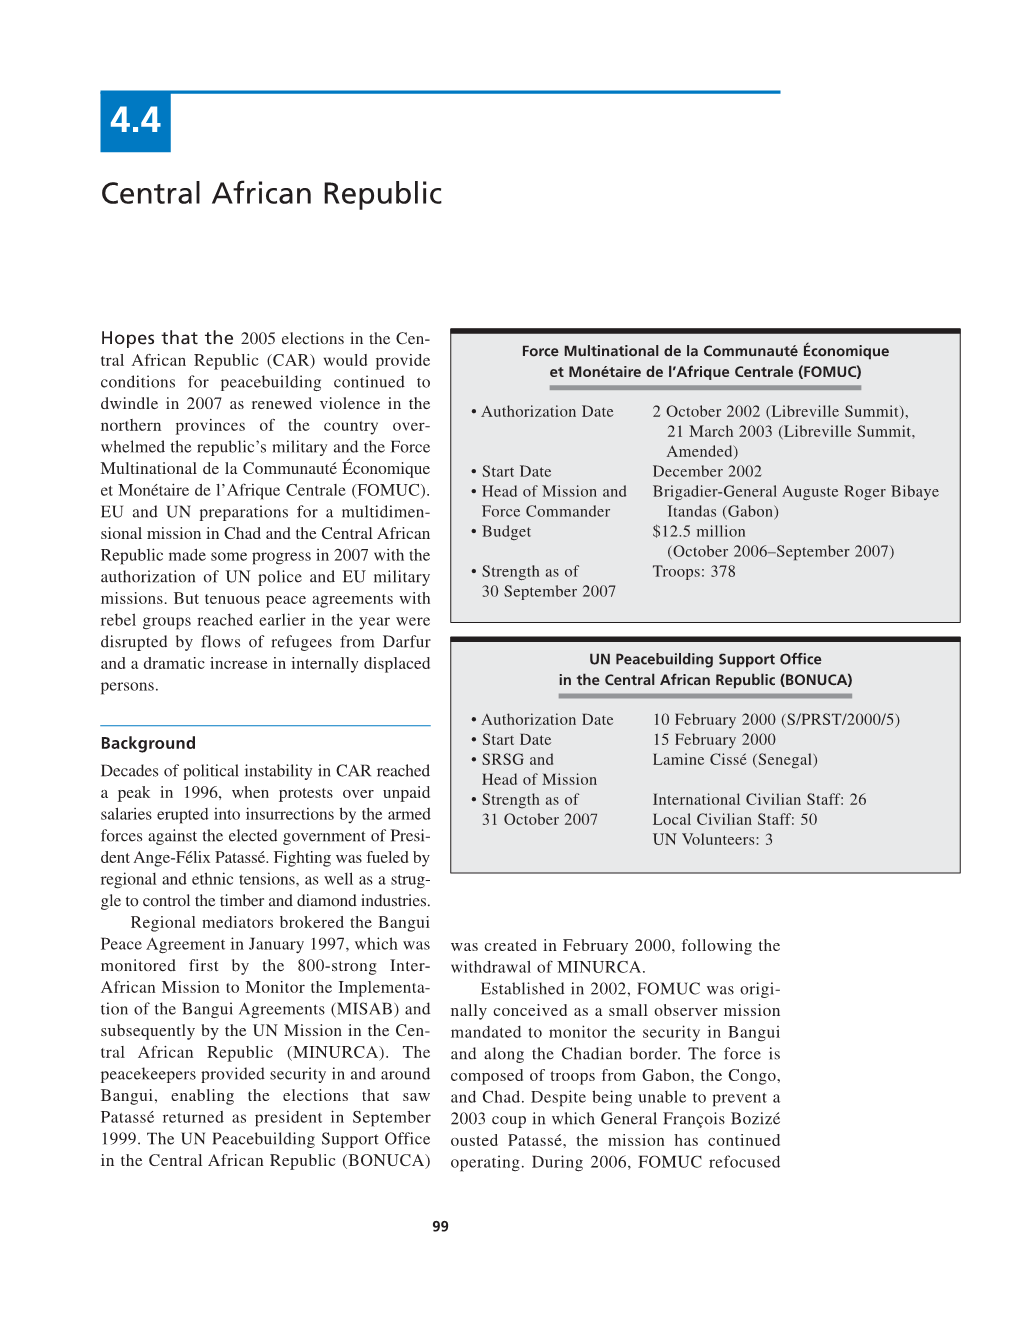 Central African Republic Mission Notes